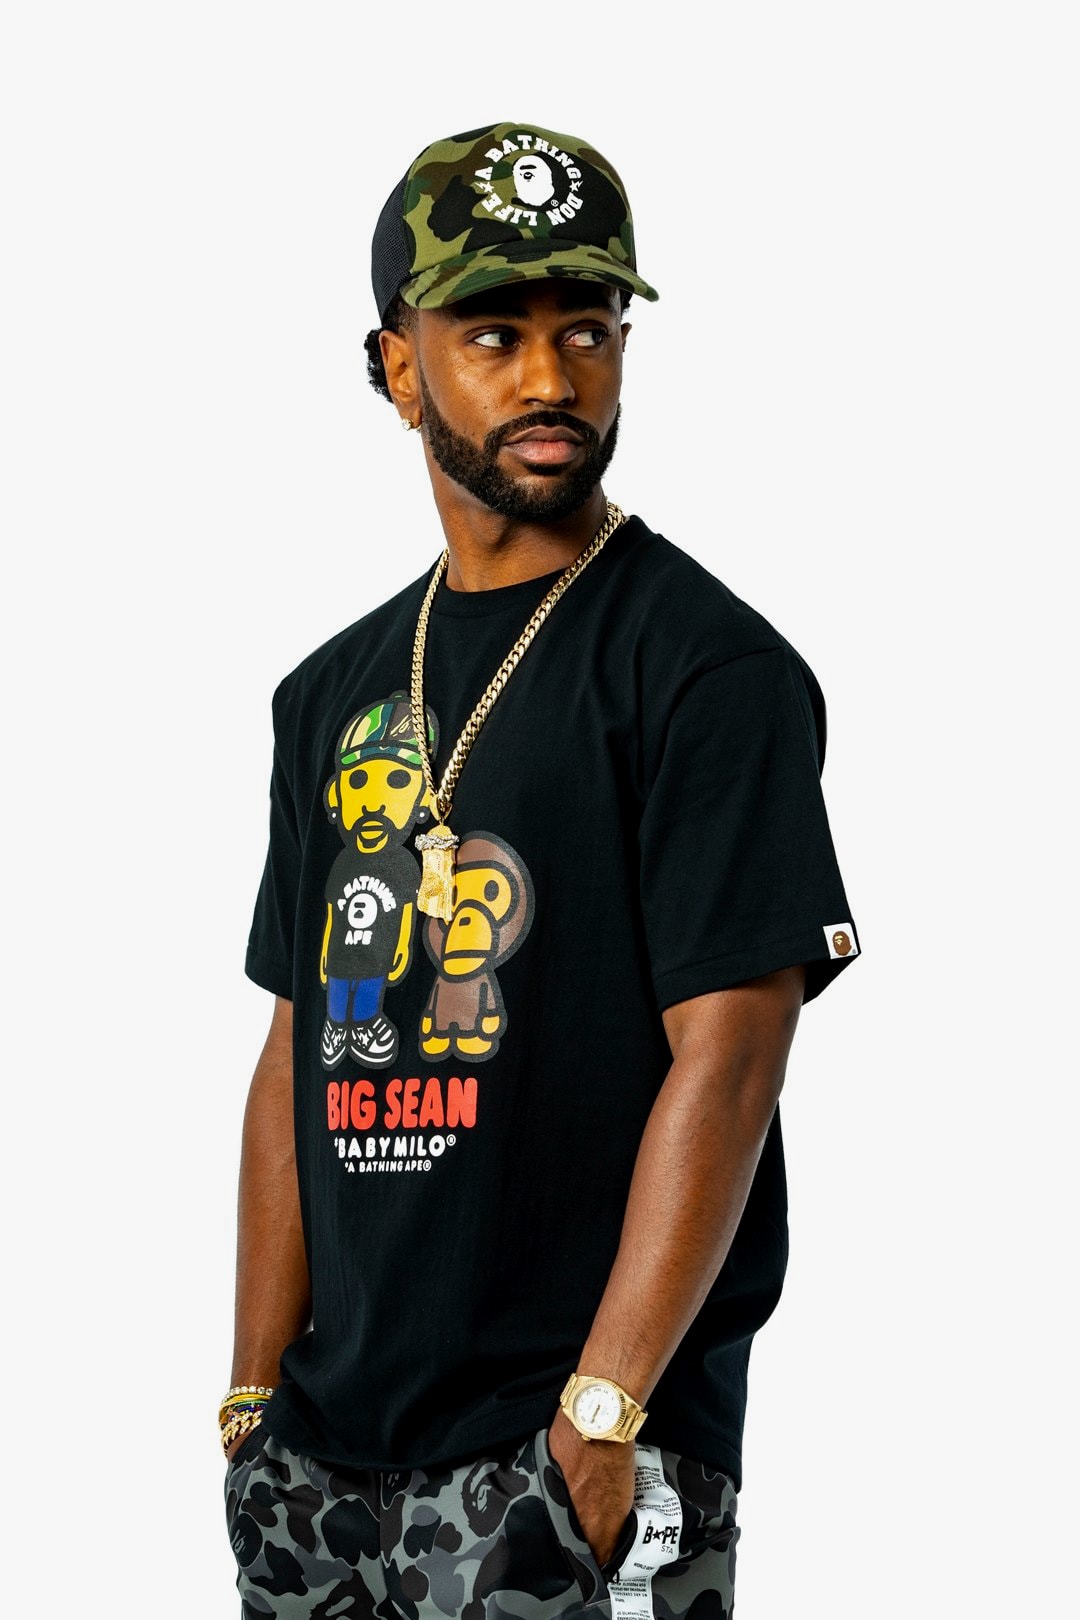 Big Sean x BAPE Collection a bathing ape collaborations collections lookbooks ape heads show t shirts baby milo a bathing don life